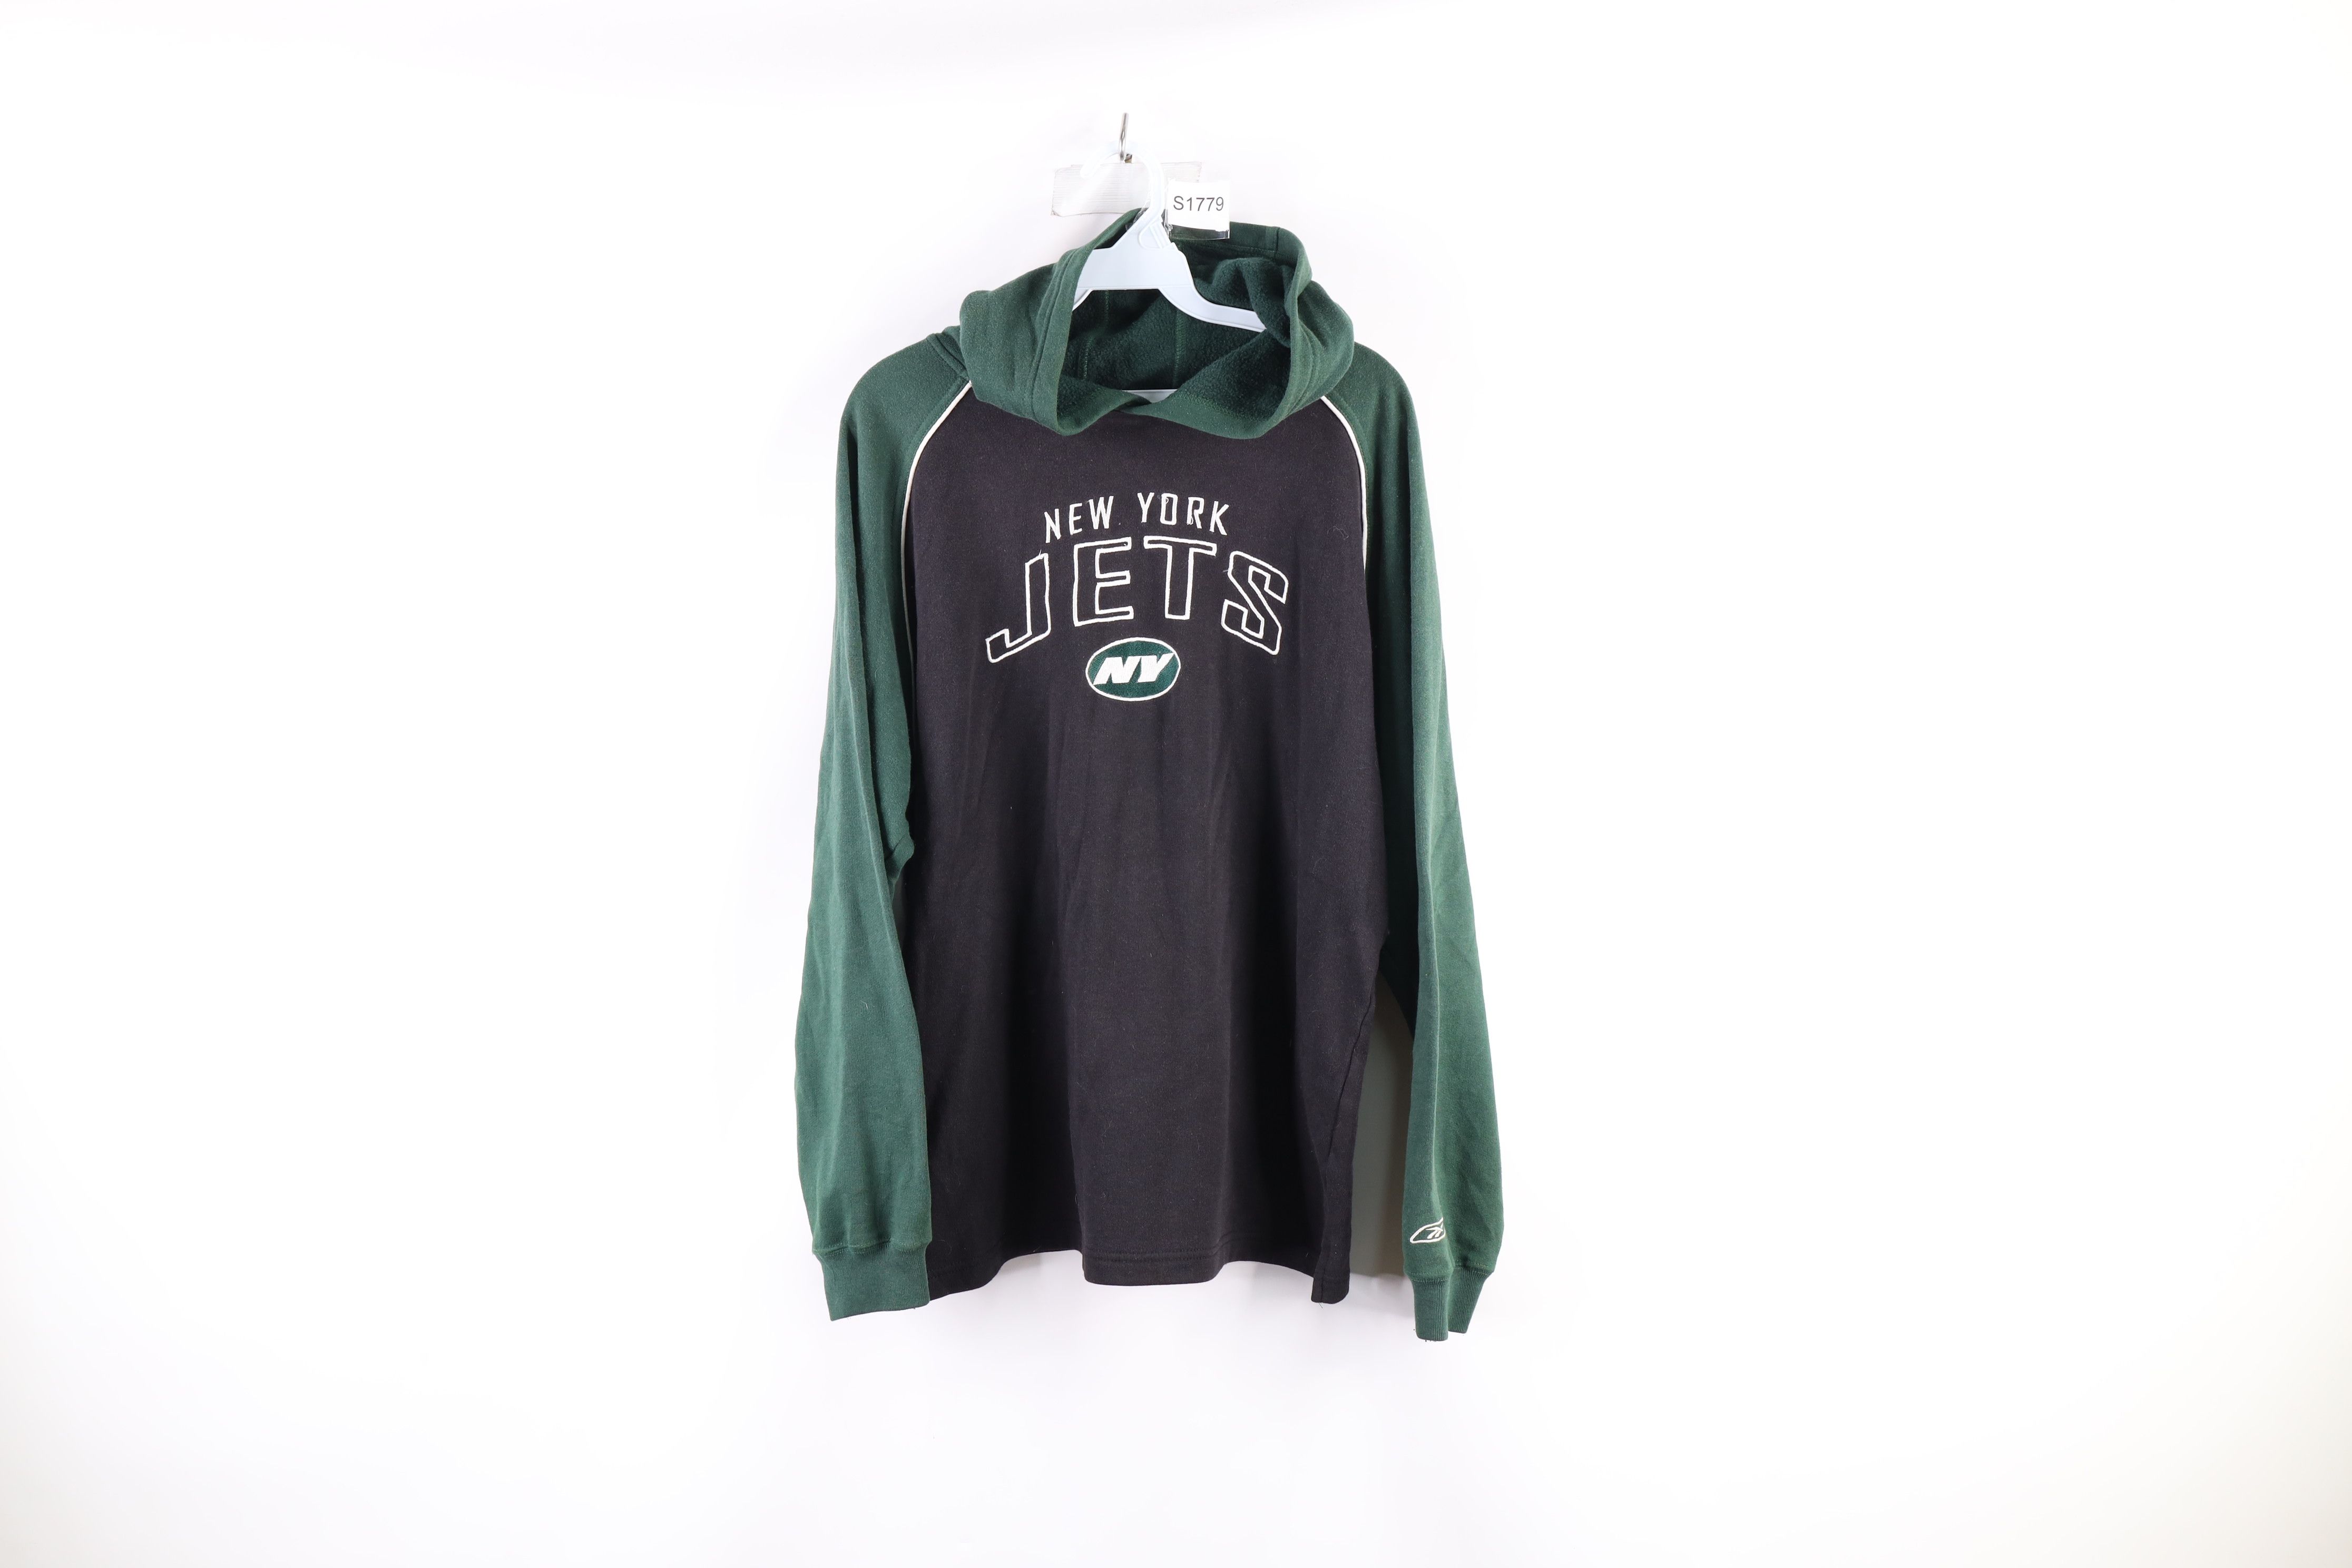 Vintage Vintage Reebok Spell Out New York Jets Football Hoodie Black Size M / US 6-8 / IT 42-44 - 1 Preview